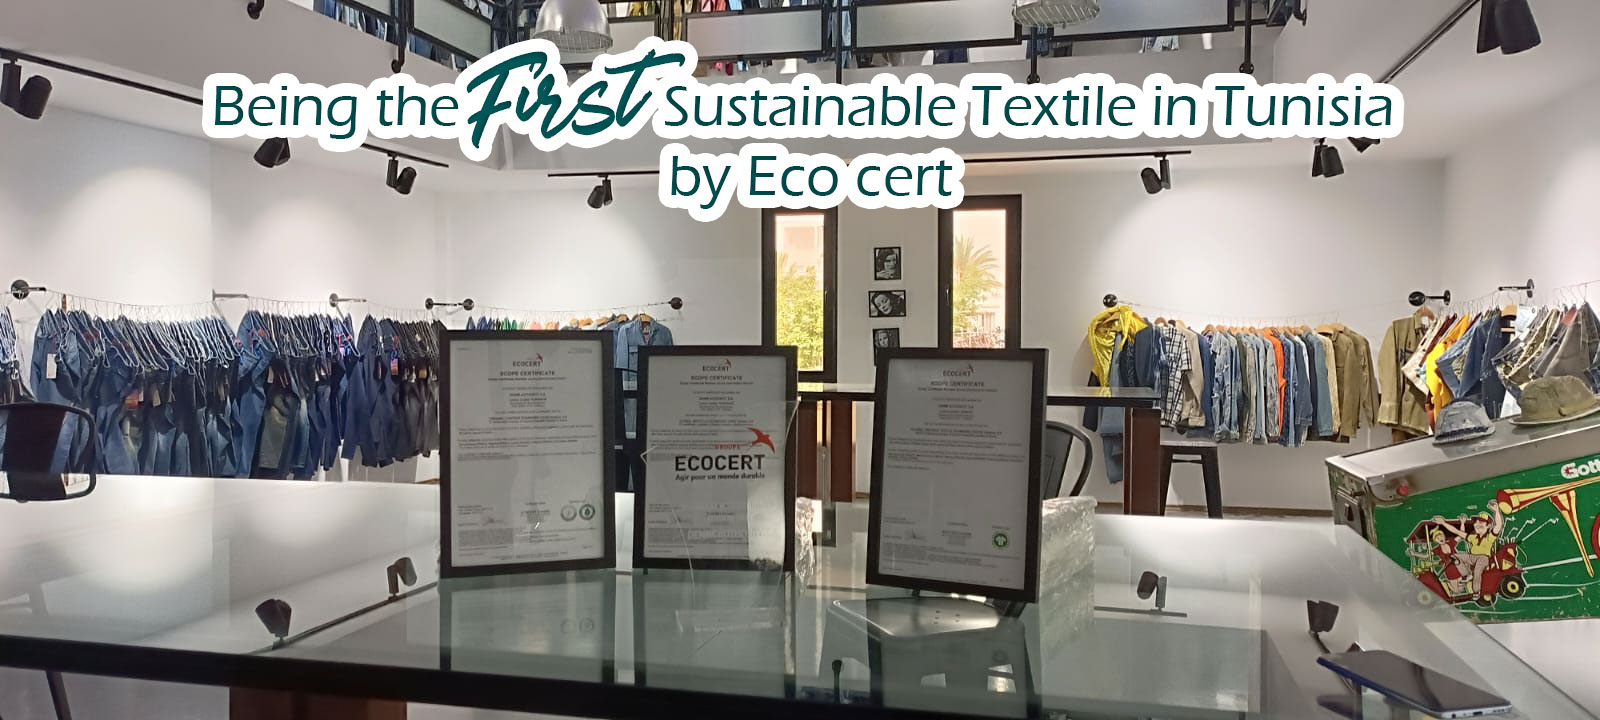 First Sustainable Textile By ECOCERT in Tunisia!